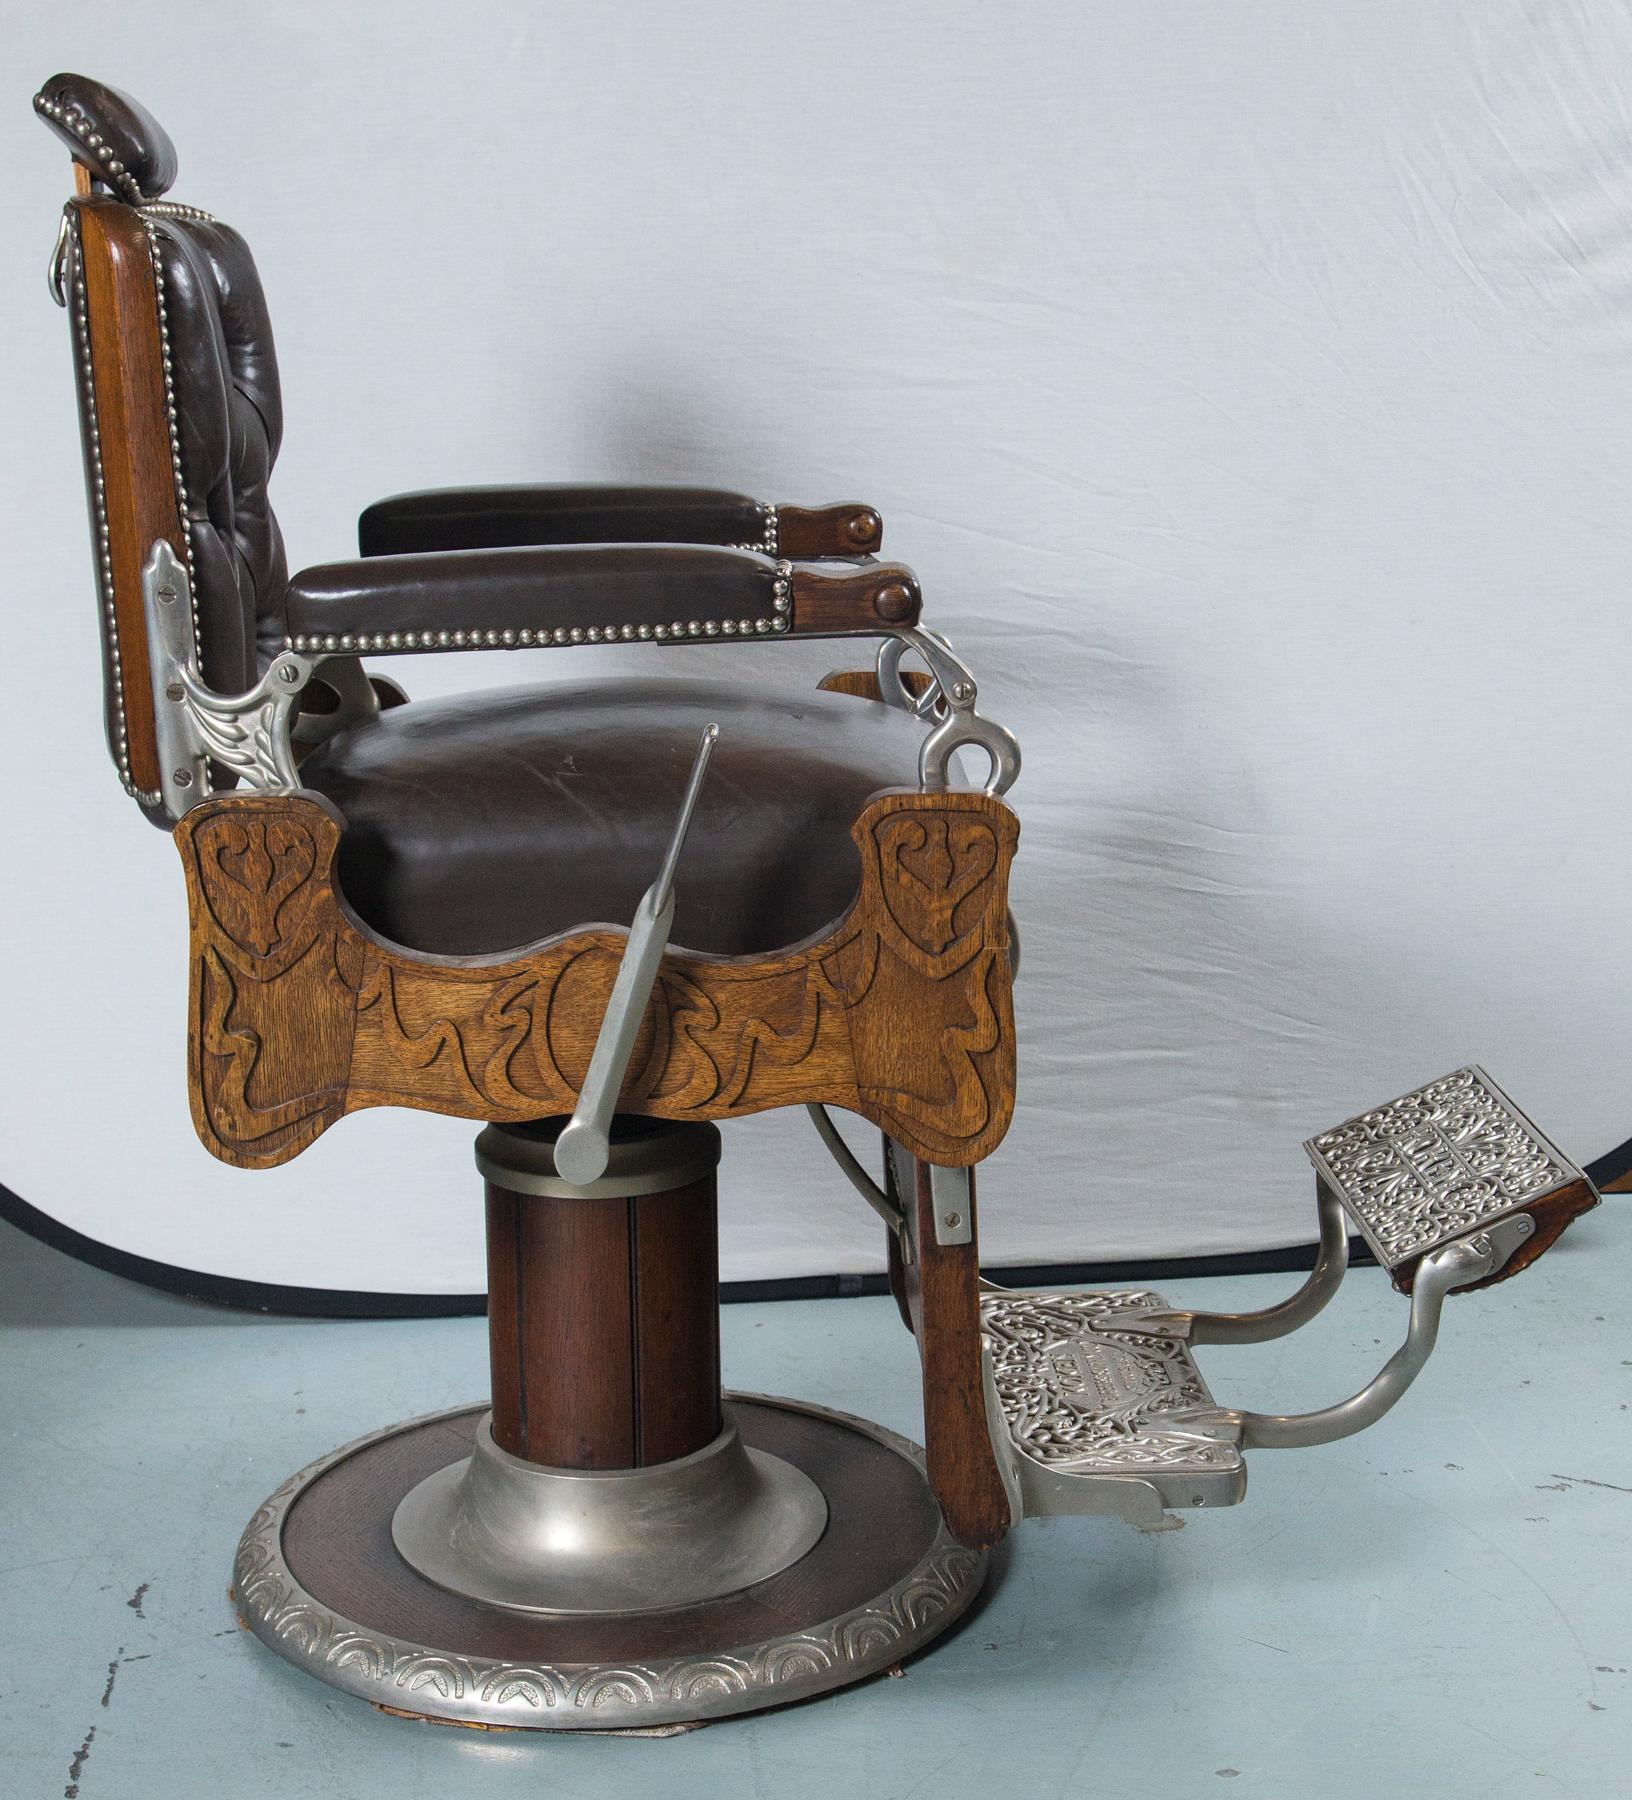 Leather Vintage Koken Barber's Chair 1890 ca signed Koken Barbers' Supply St. Louis, Mo